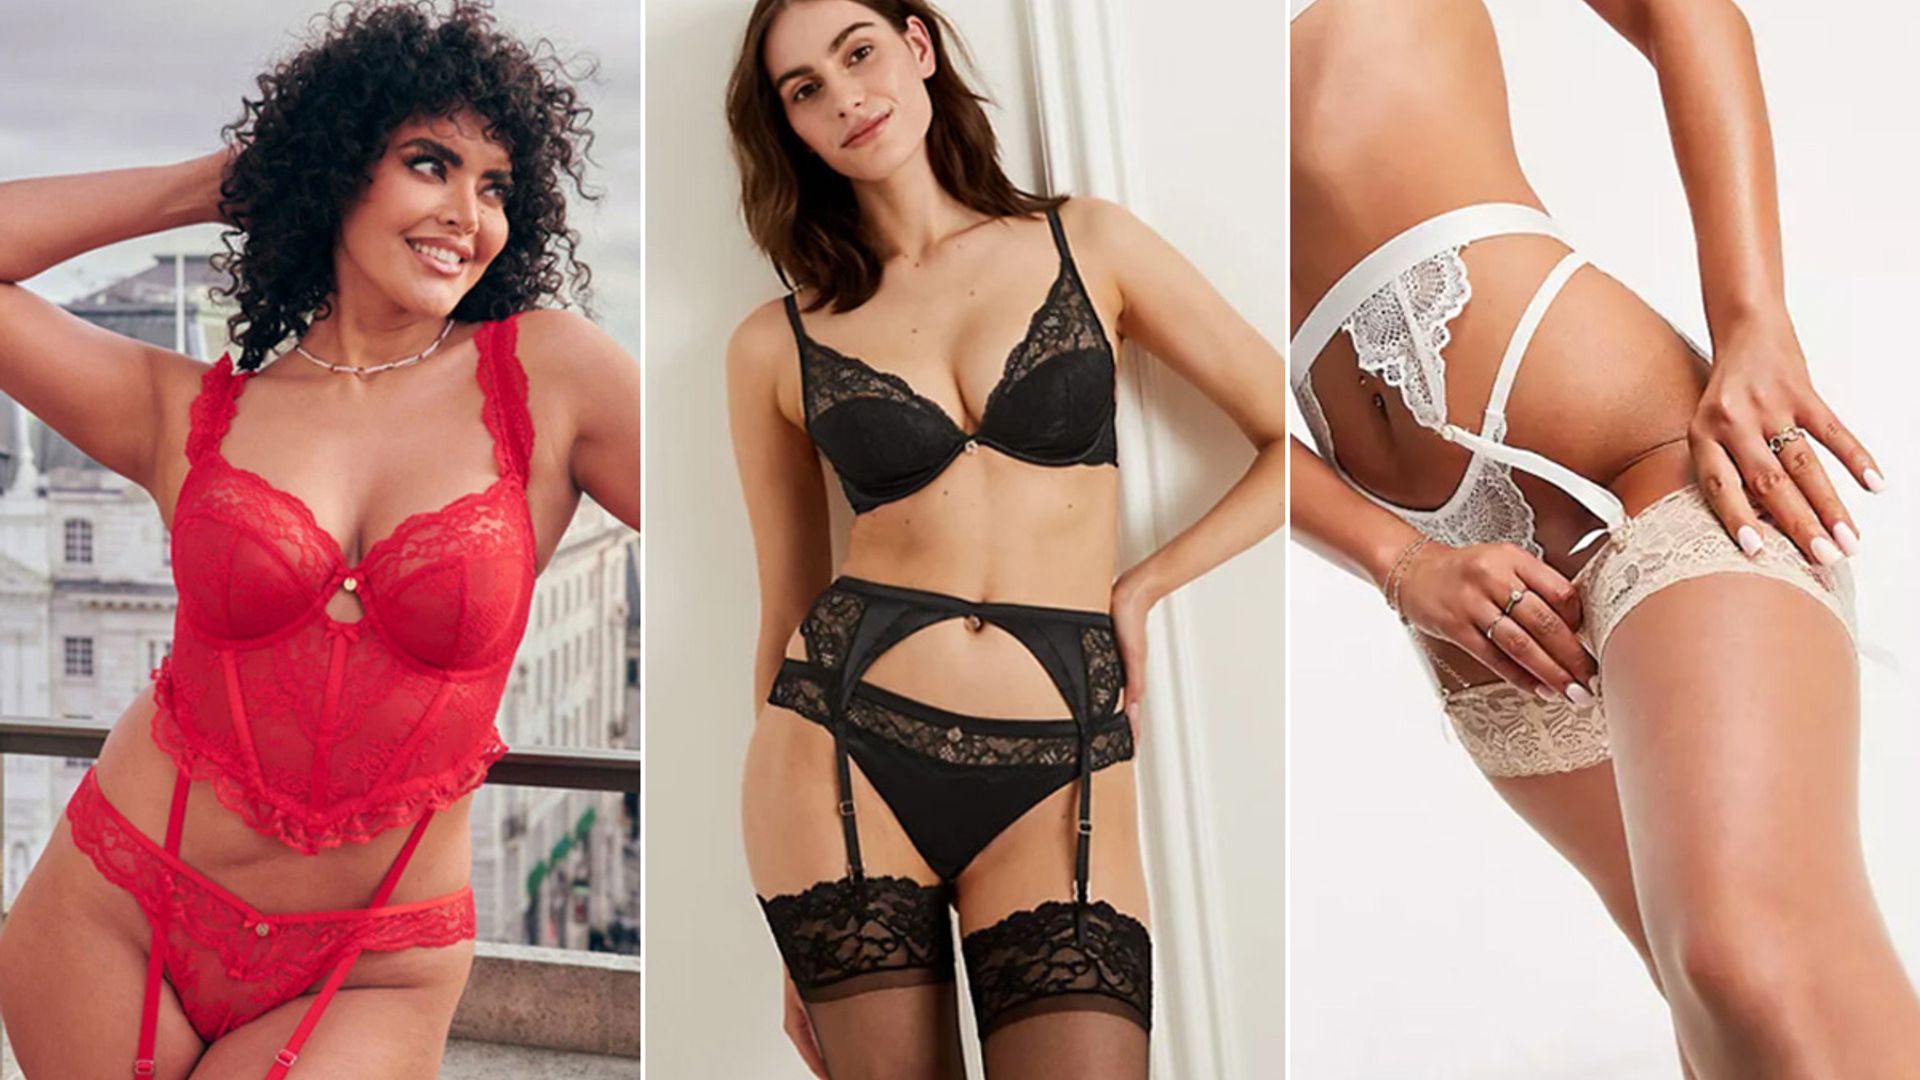 How to wear suspenders and stockings: Lingerie expert tips